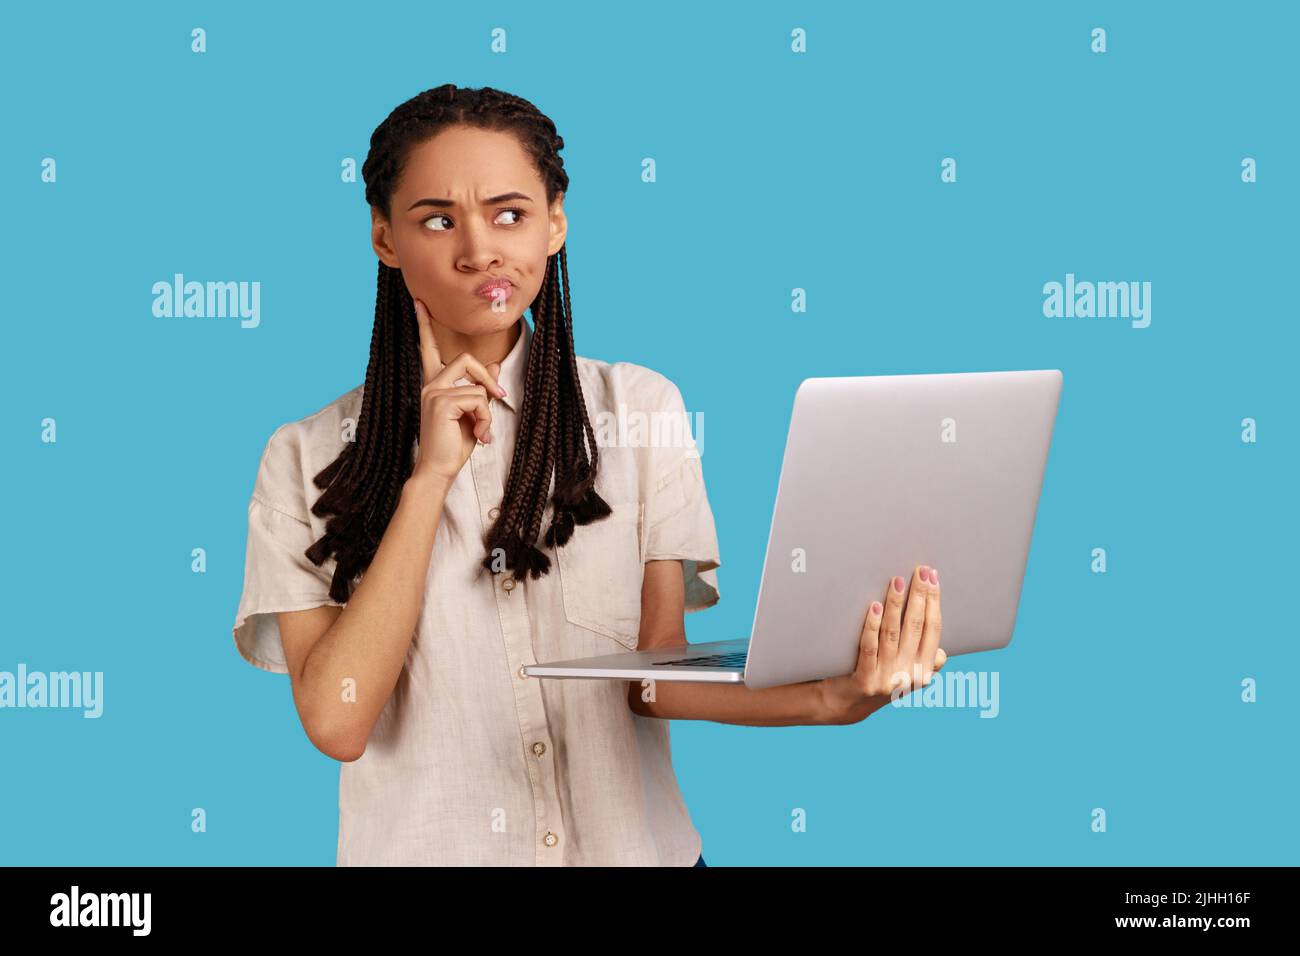 Pensive woman with dreadlocks works on new startup project, makes internet researches, analyzes data, uses modern laptop computer and wireless internet. Indoor studio shot isolated on blue background. Stock Photo